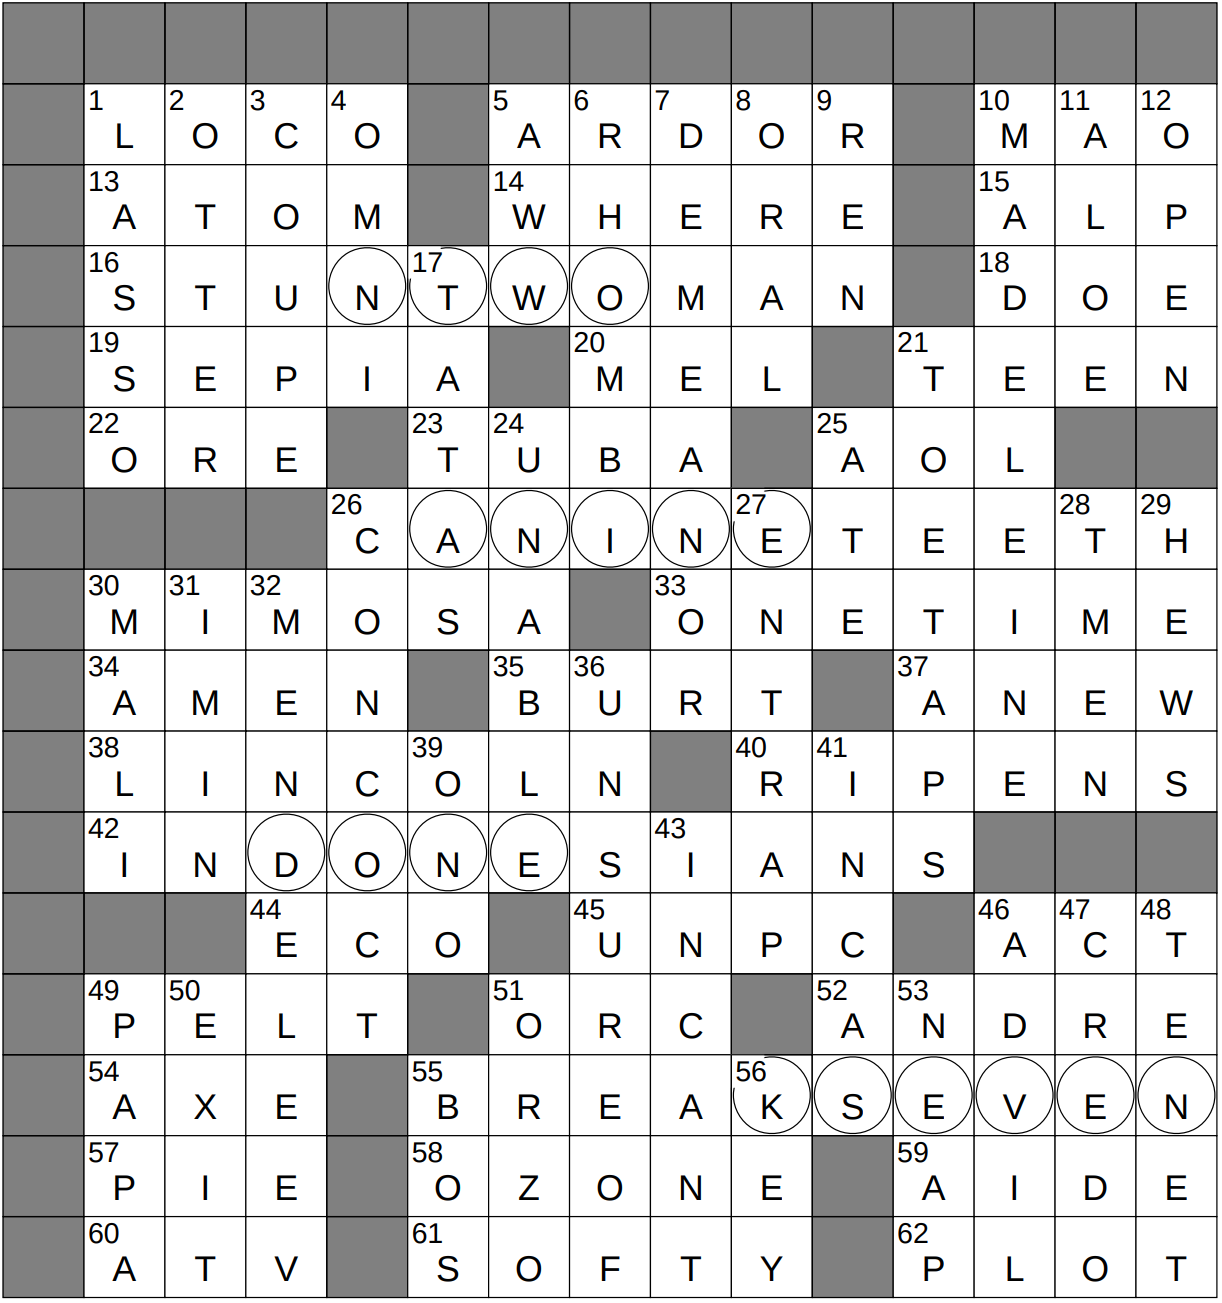 39  side by side calculation nyt crossword VeronikaHuriyah